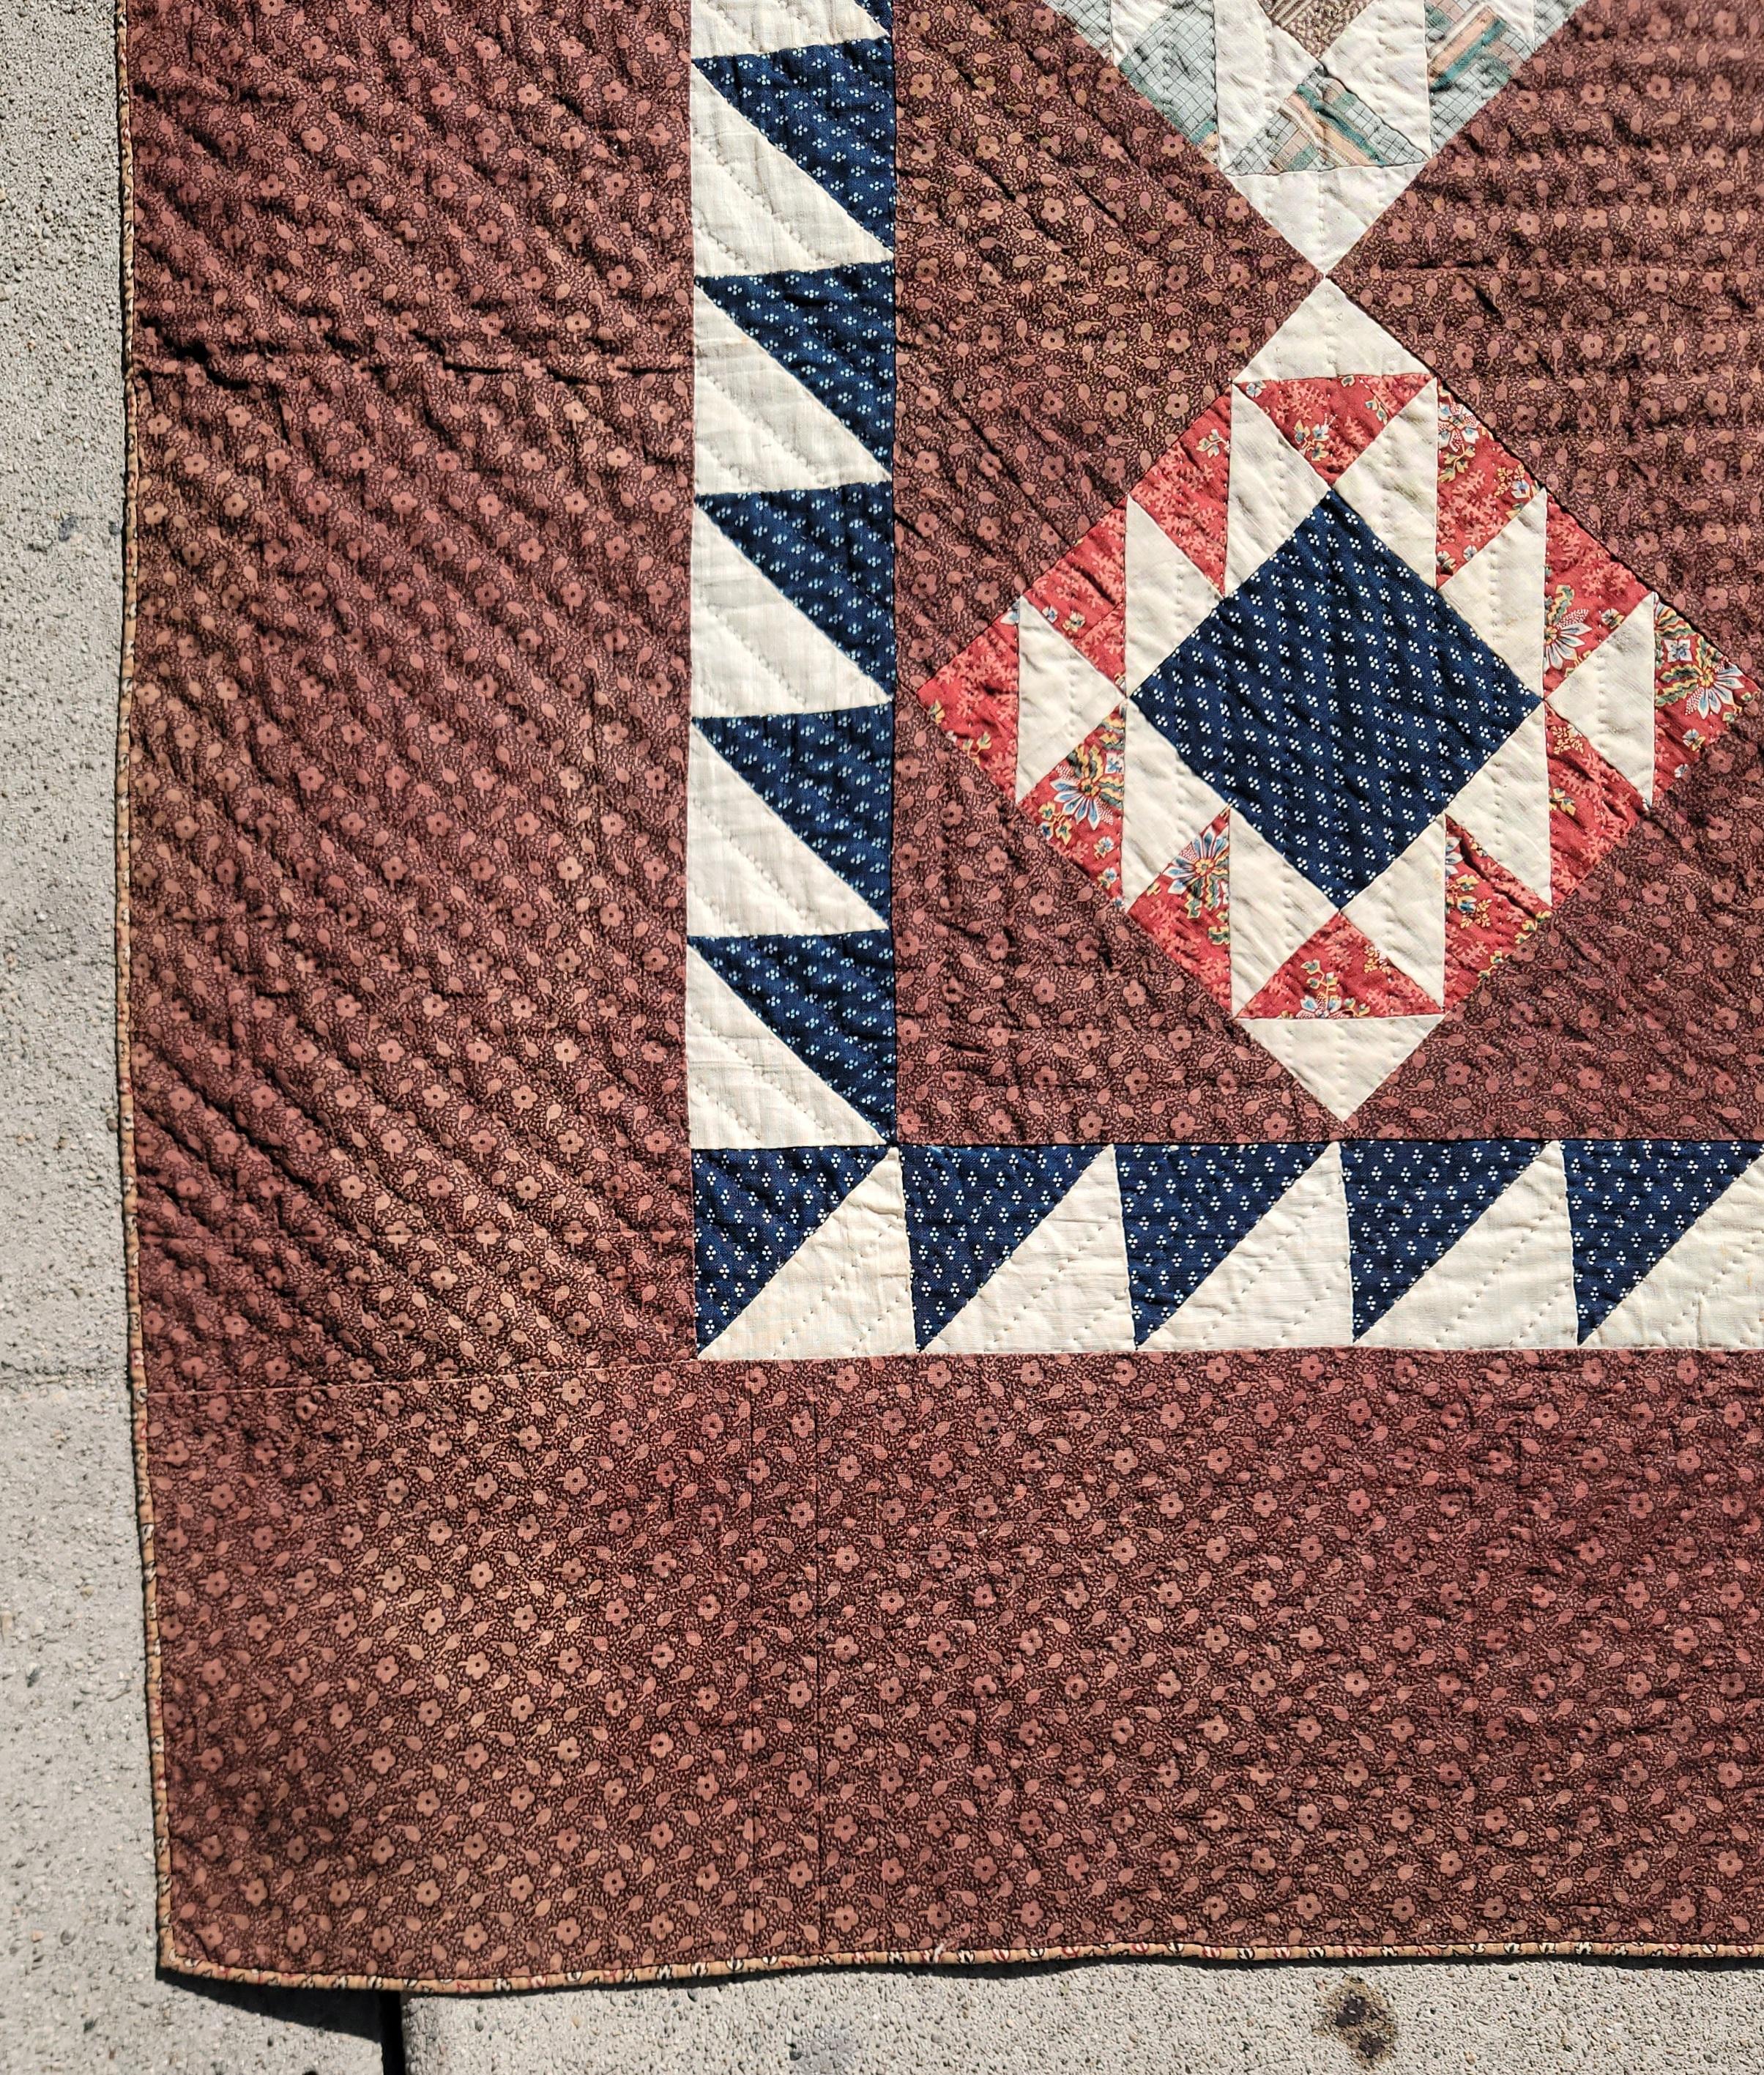 This fine 19th century quilt comes to us from the Pack Wood House Museum in Lewisburg, Pennsylvania and is in nice condition .It contains lots of early calico fabrics & chintz fabrics from the early 19th century.